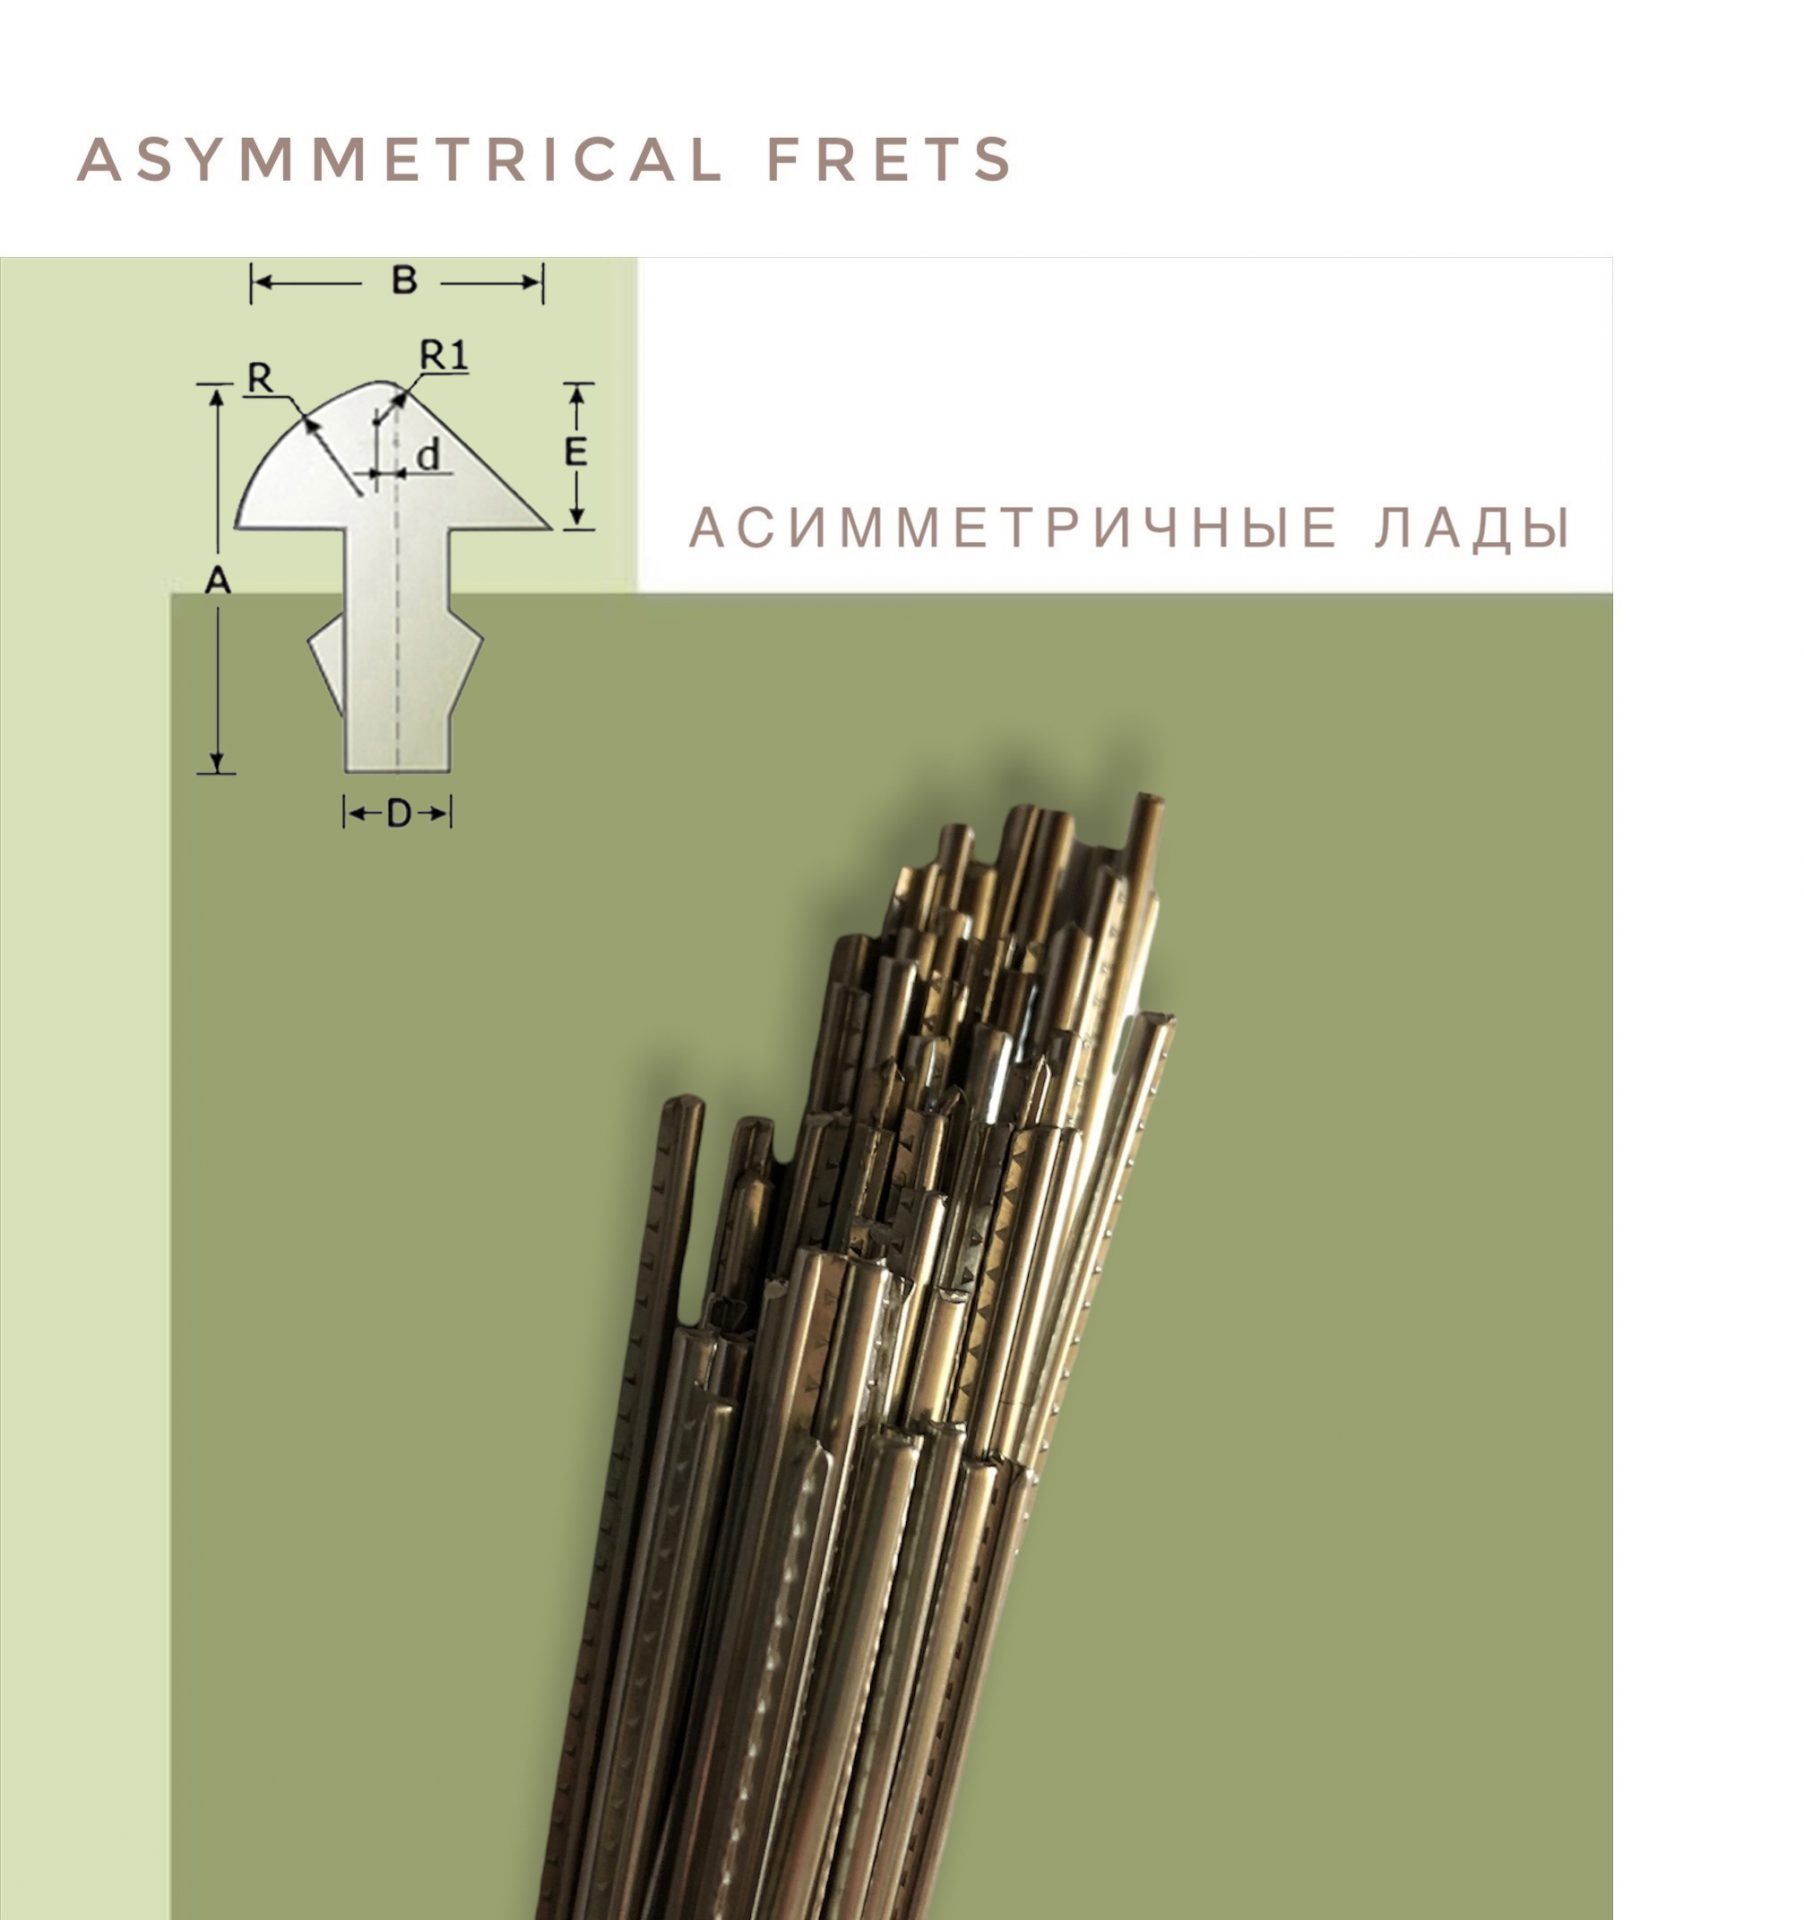 Features of shapes: asymmetrical frets